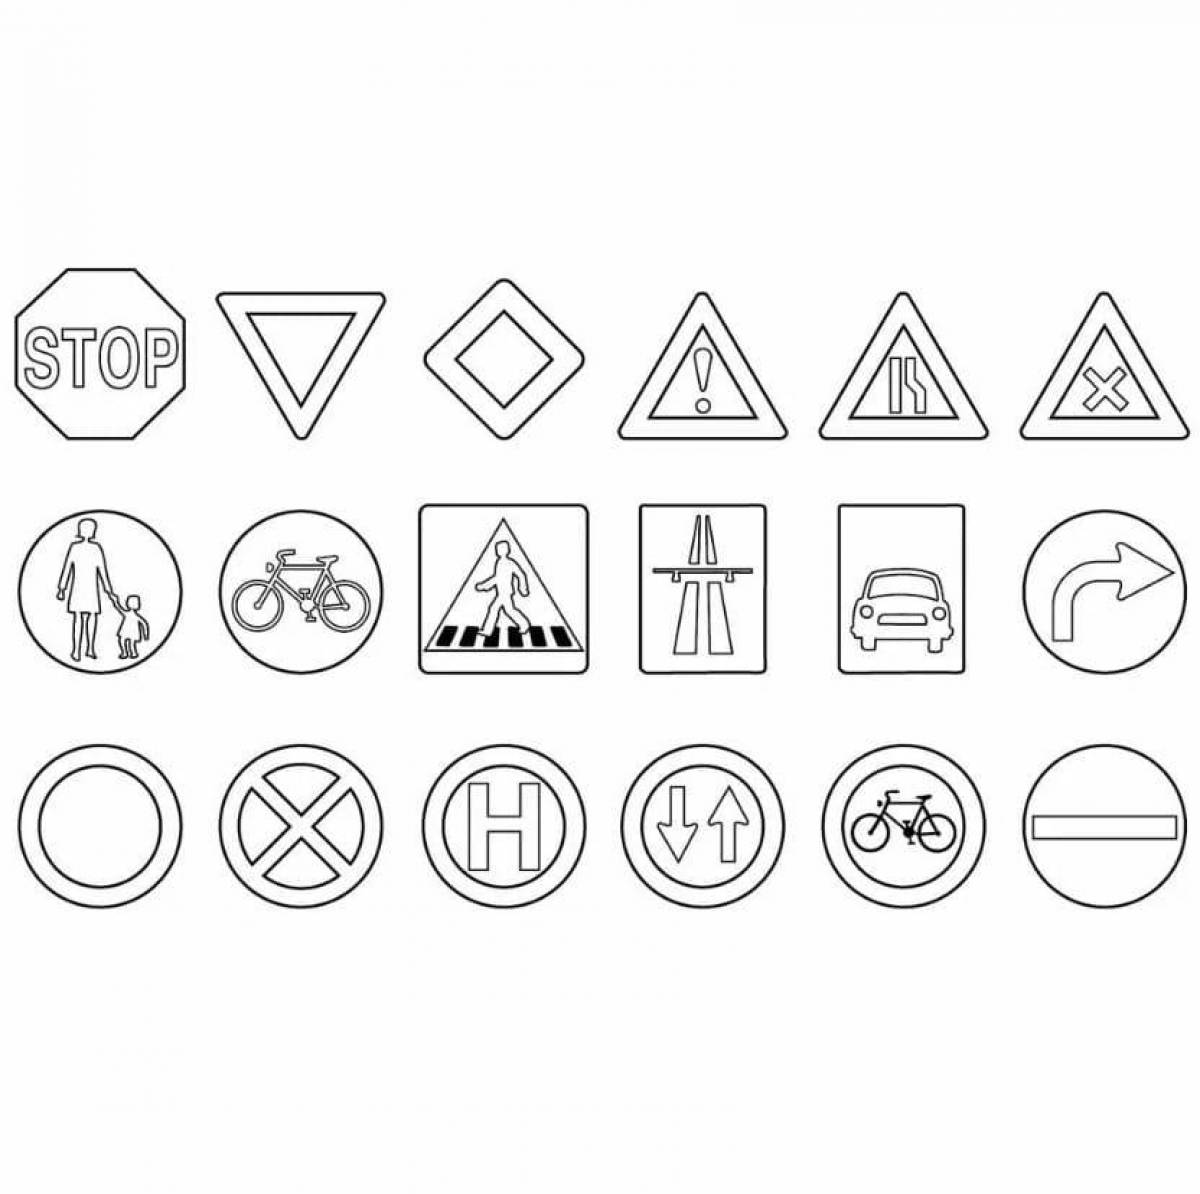 Coloring for bright traffic signs